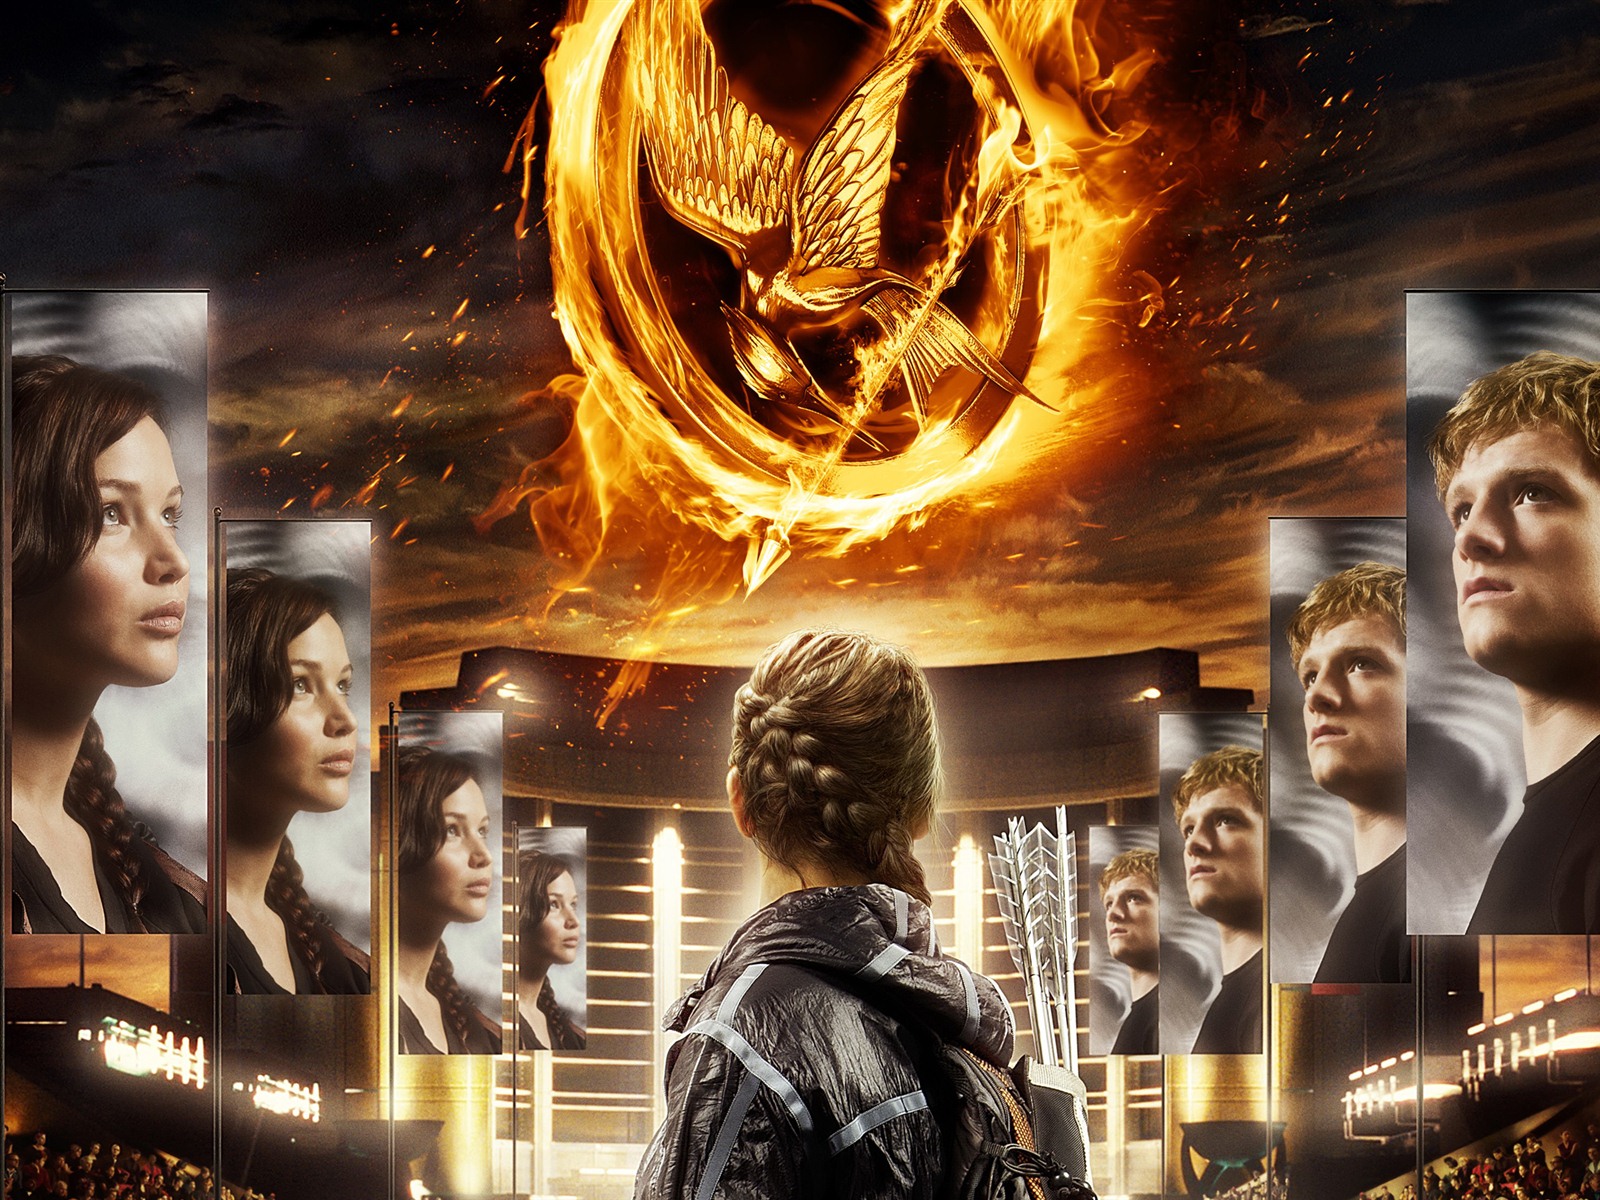 The Hunger Games HD wallpapers #1 - 1600x1200